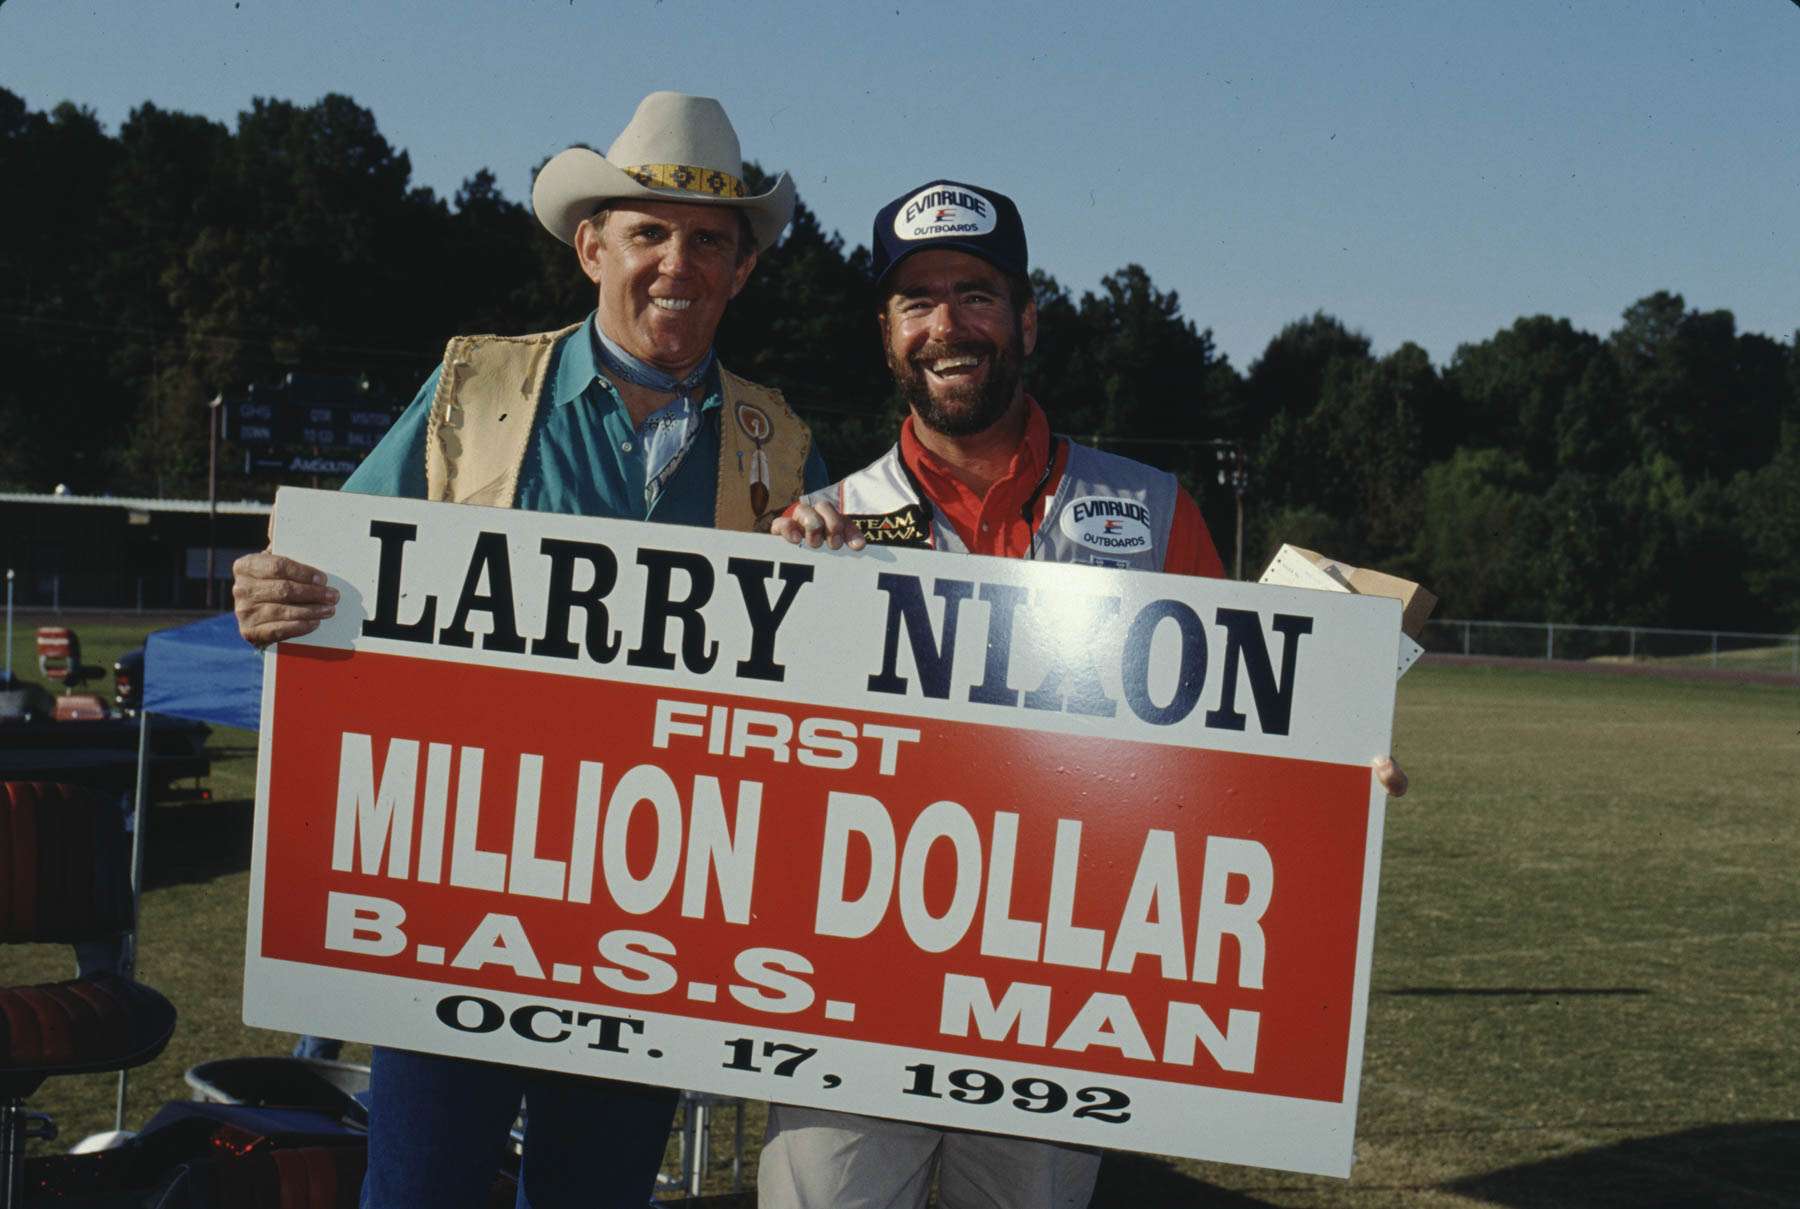 <p><b>7. Who among the all-time great pro anglers had the biggest influence on you? </p></b>
I was lucky to have some of the veteran guys like Larry Nixon, Tommy Martin on the Nitro team when I first started and they helped me a lot. Denny Brauer became a great friend and mentor as well, and they all gave me solid advice. We spent a lot of time together through the first half of my career.
